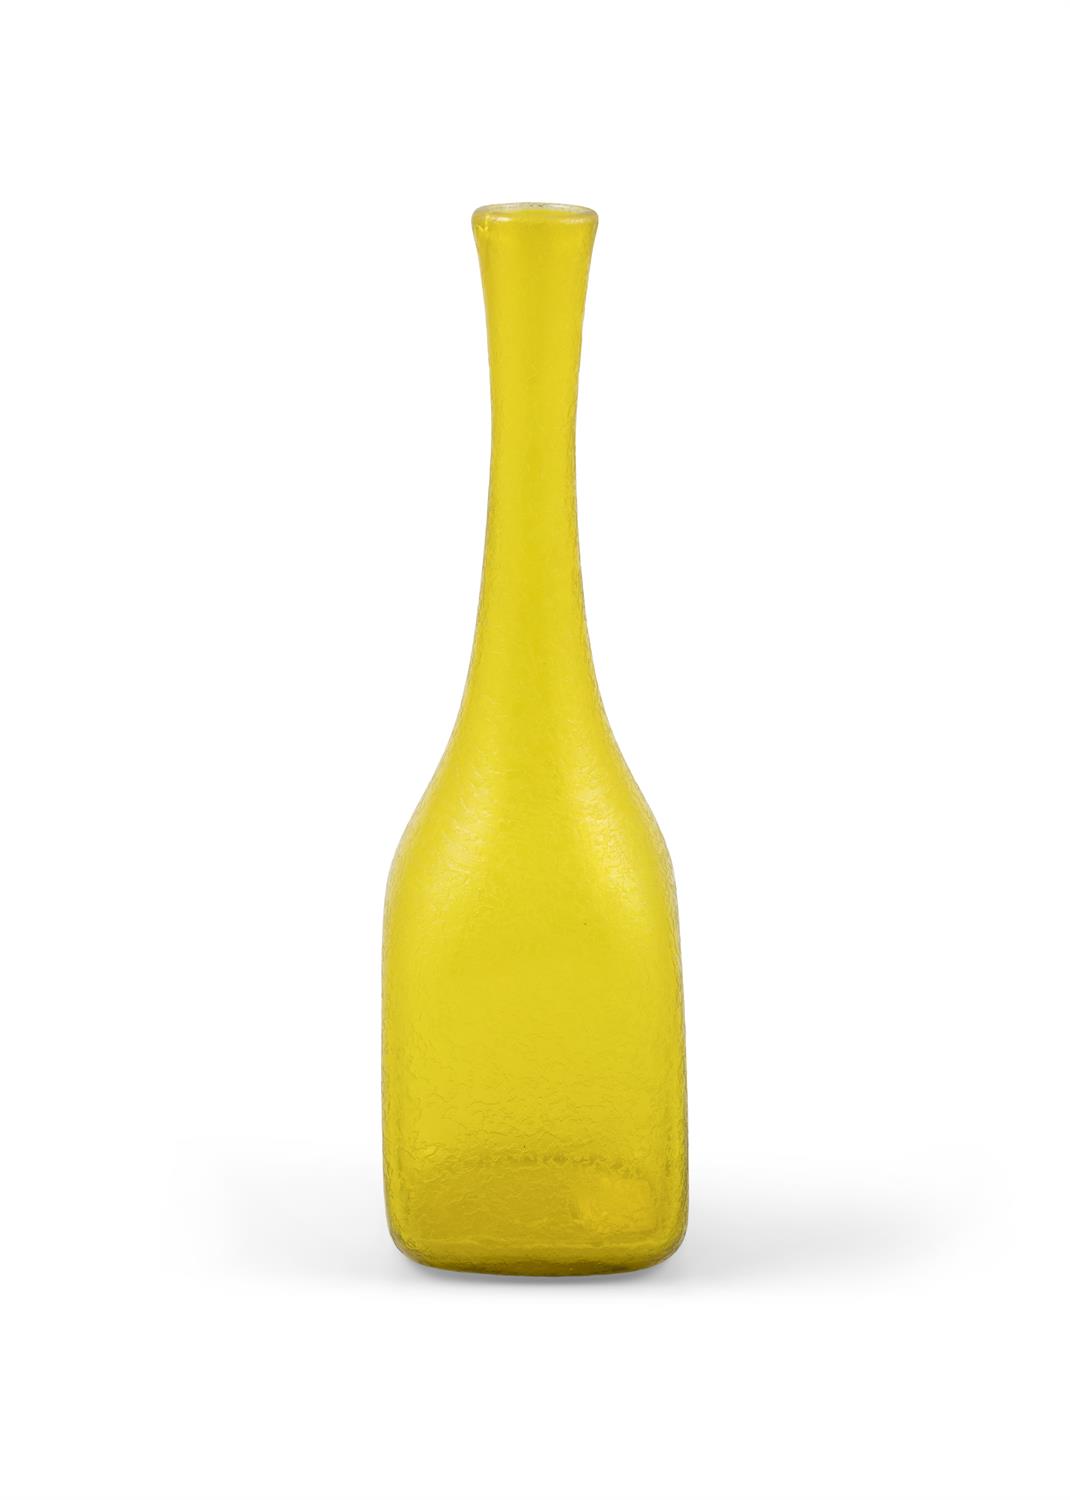 VASE A yellow vintage glass vase by Carlo Nason for Moretti & Nason. Italy, c. 1960. 29.5cm(h) - Image 2 of 2